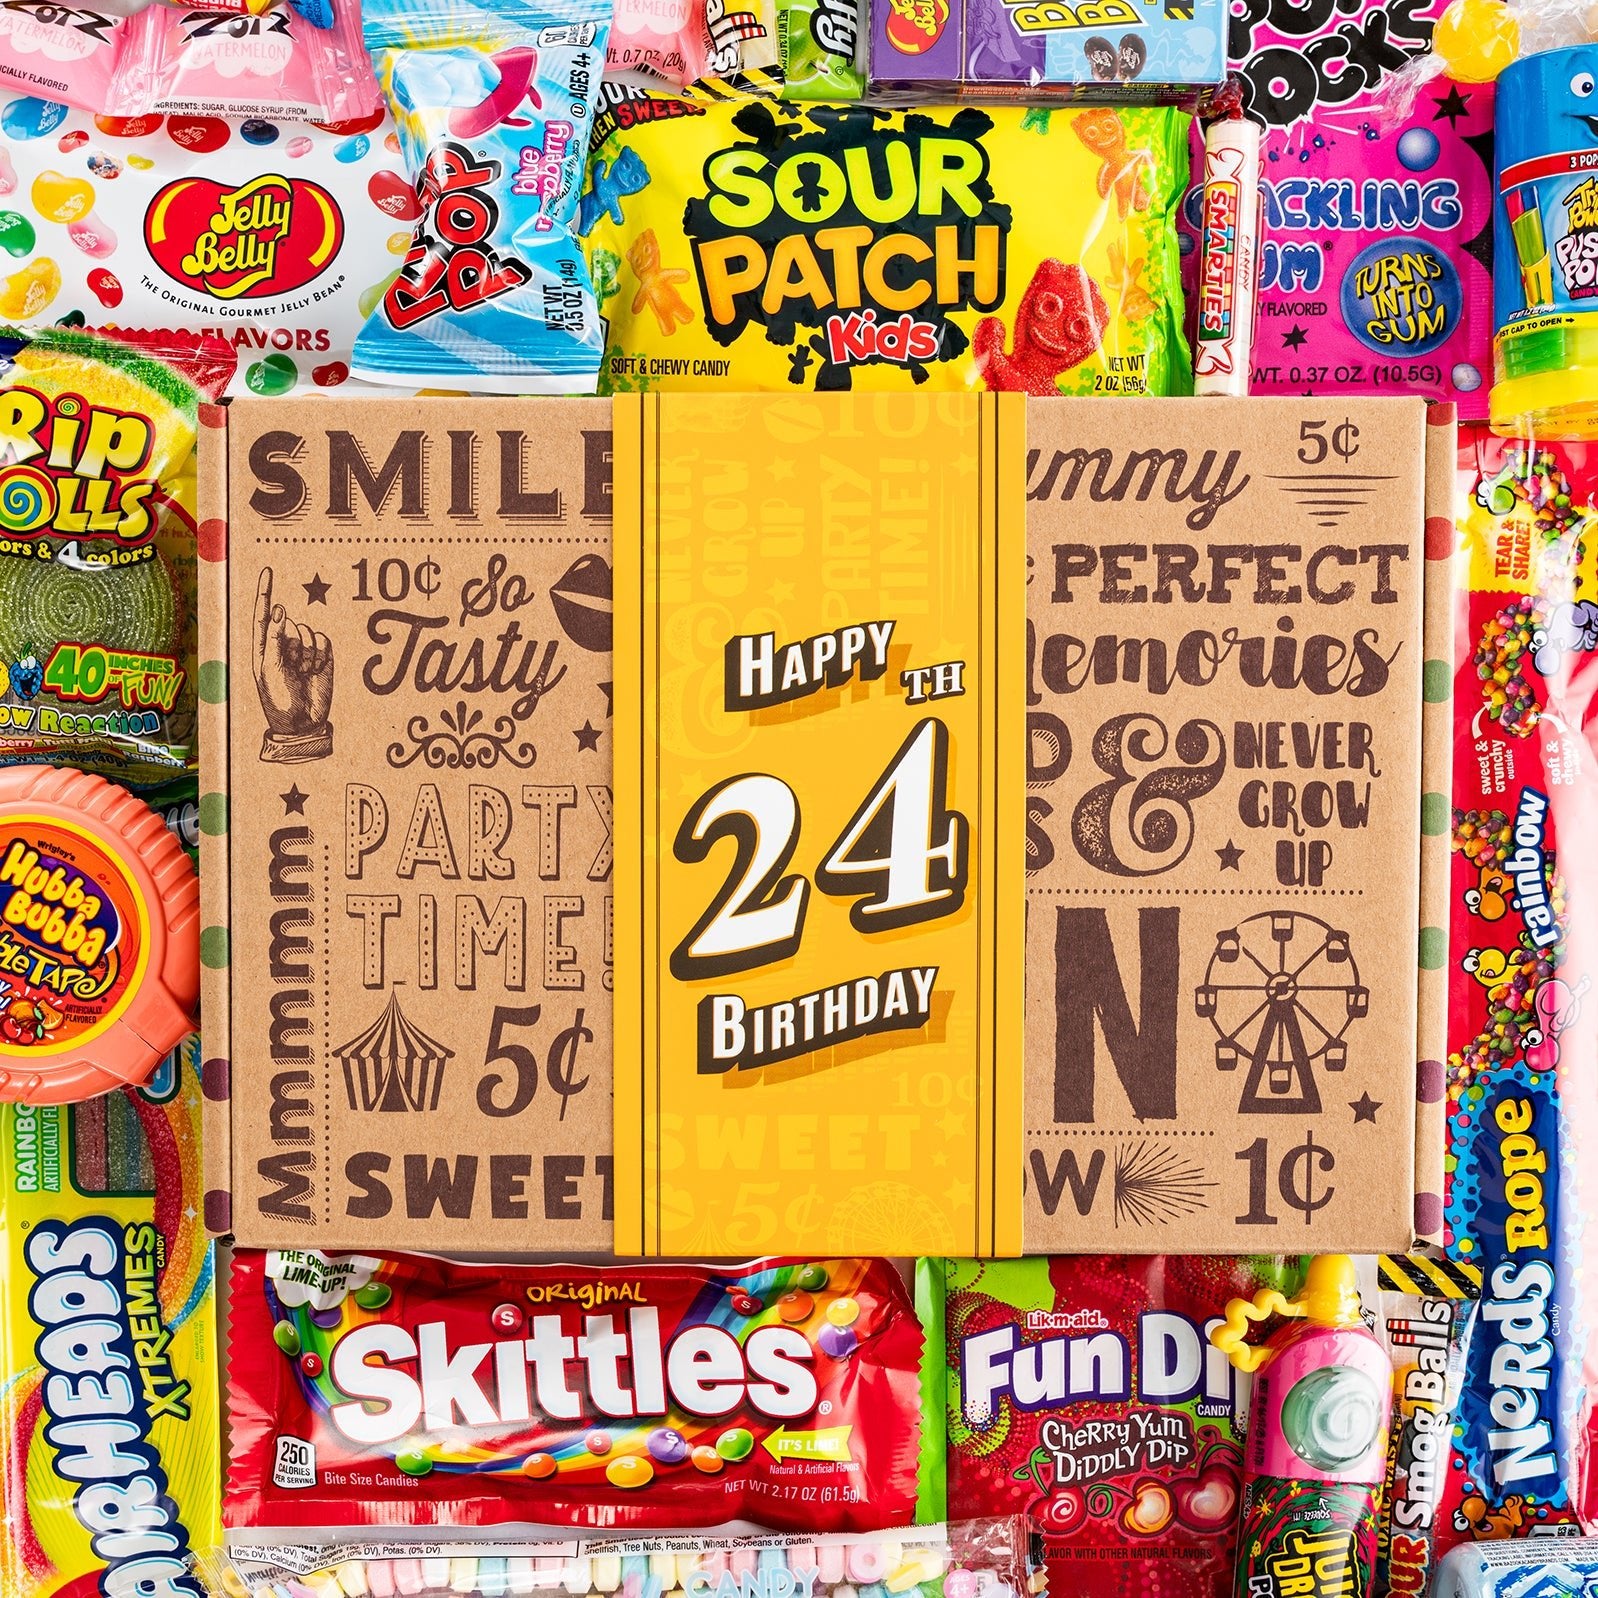 24th Birthday Retro Candy Gift - Vintage Candy Co.